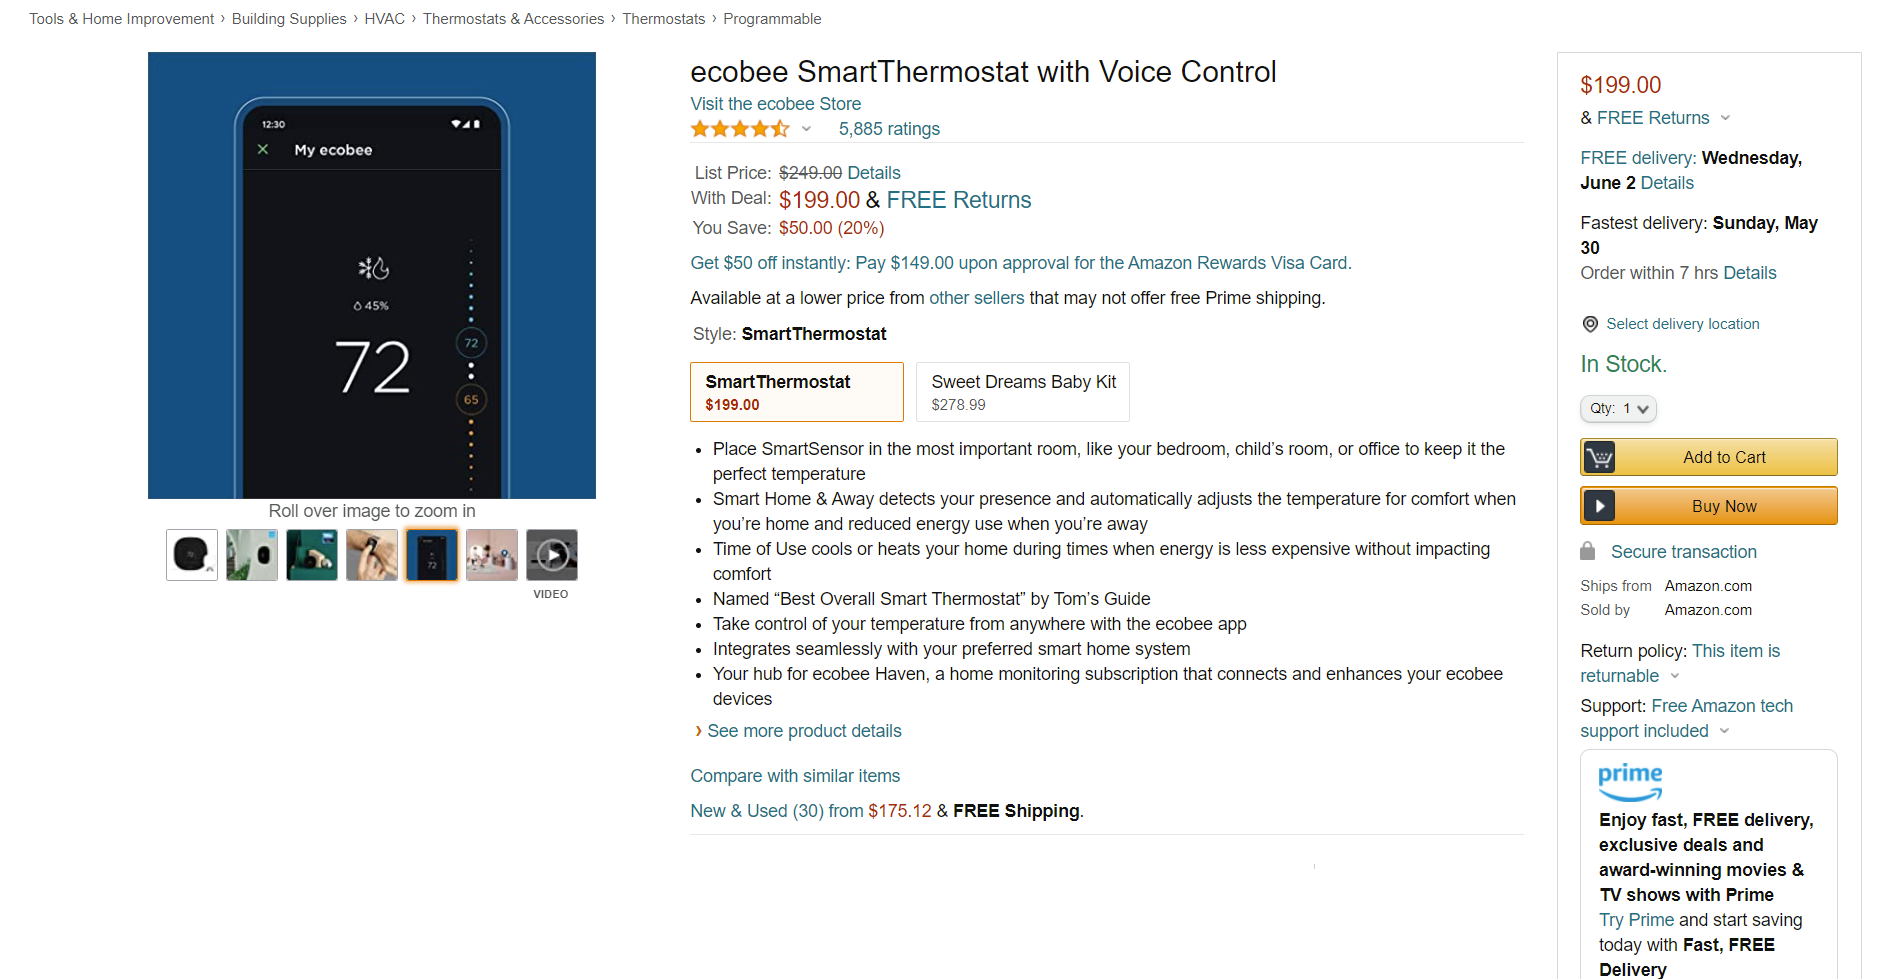 Ecobee smart thermostat deal